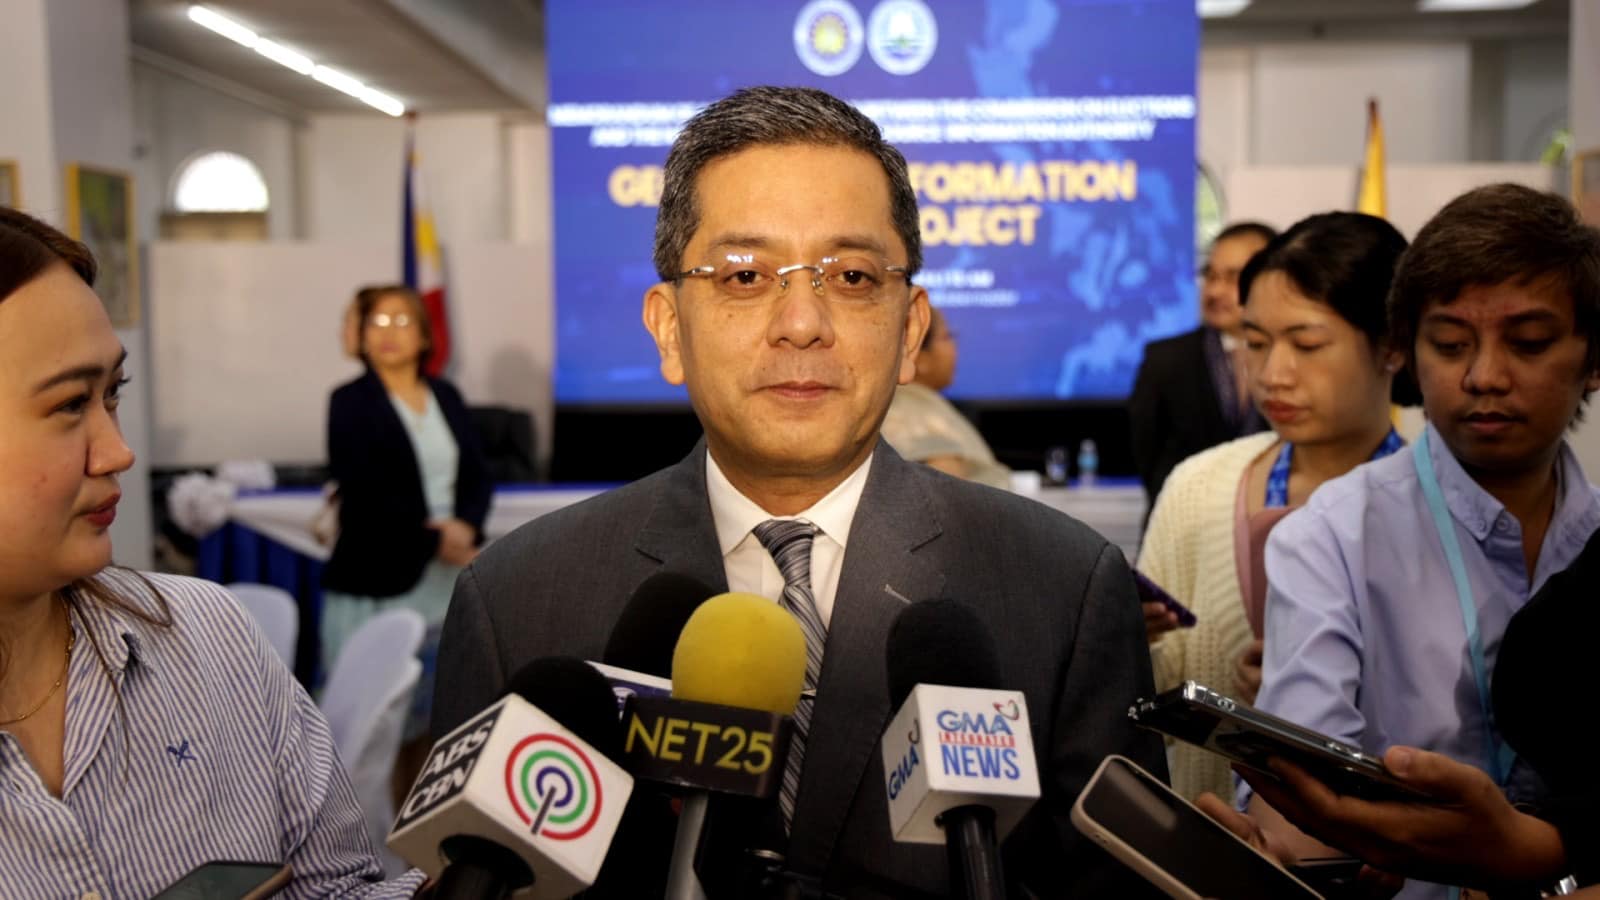 Comelec chairperson George Erwin Garcia